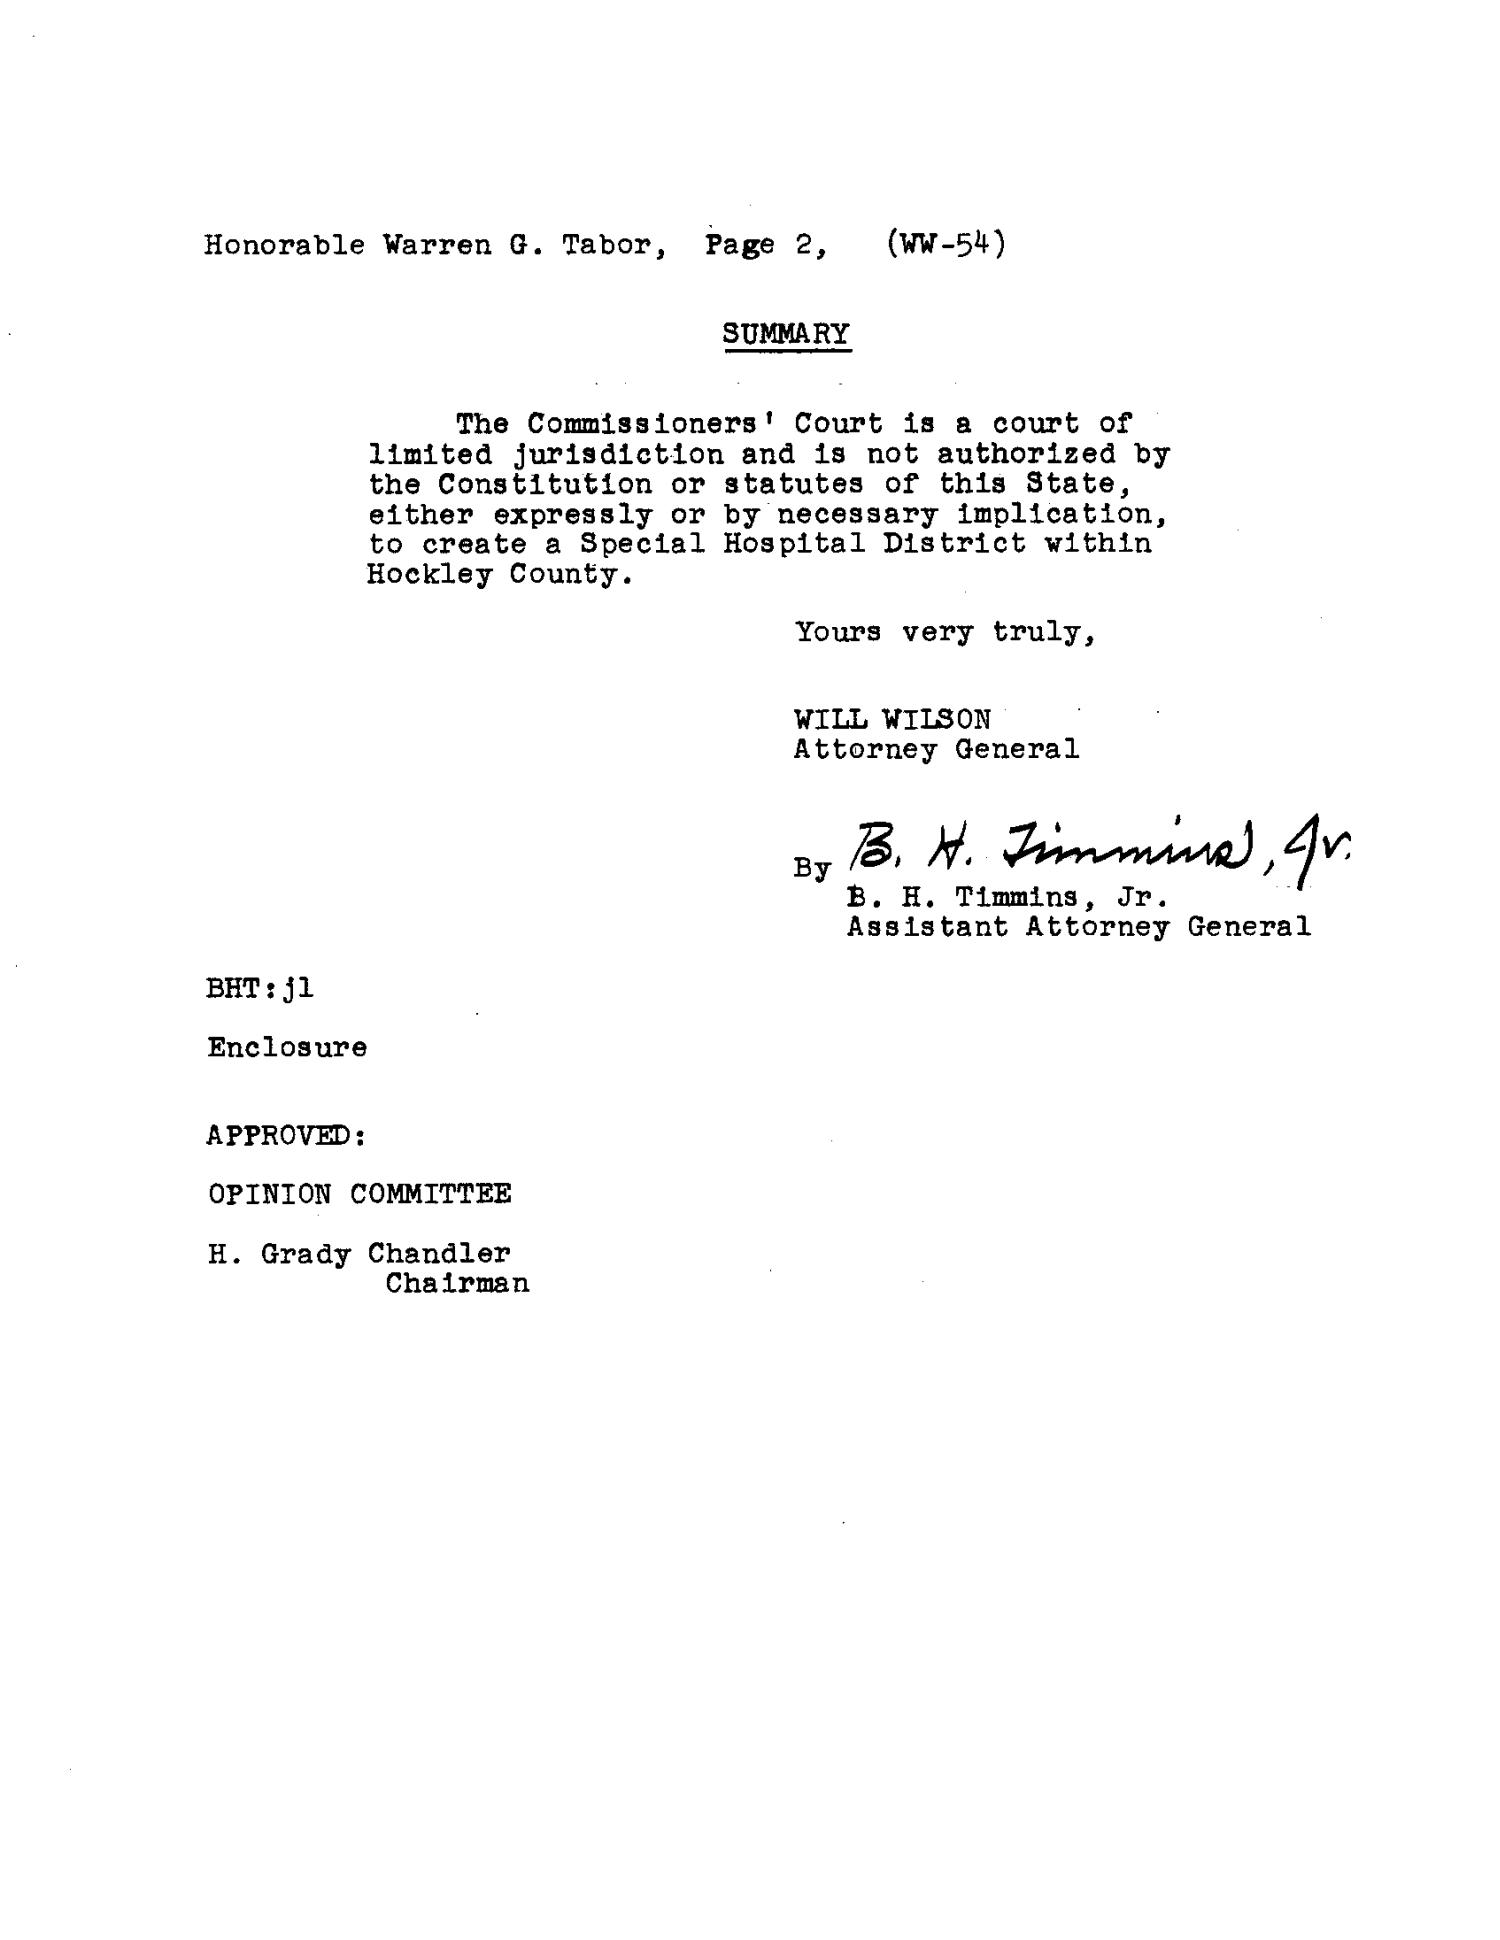 Texas Attorney General Opinion: WW-54
                                                
                                                    [Sequence #]: 2 of 2
                                                